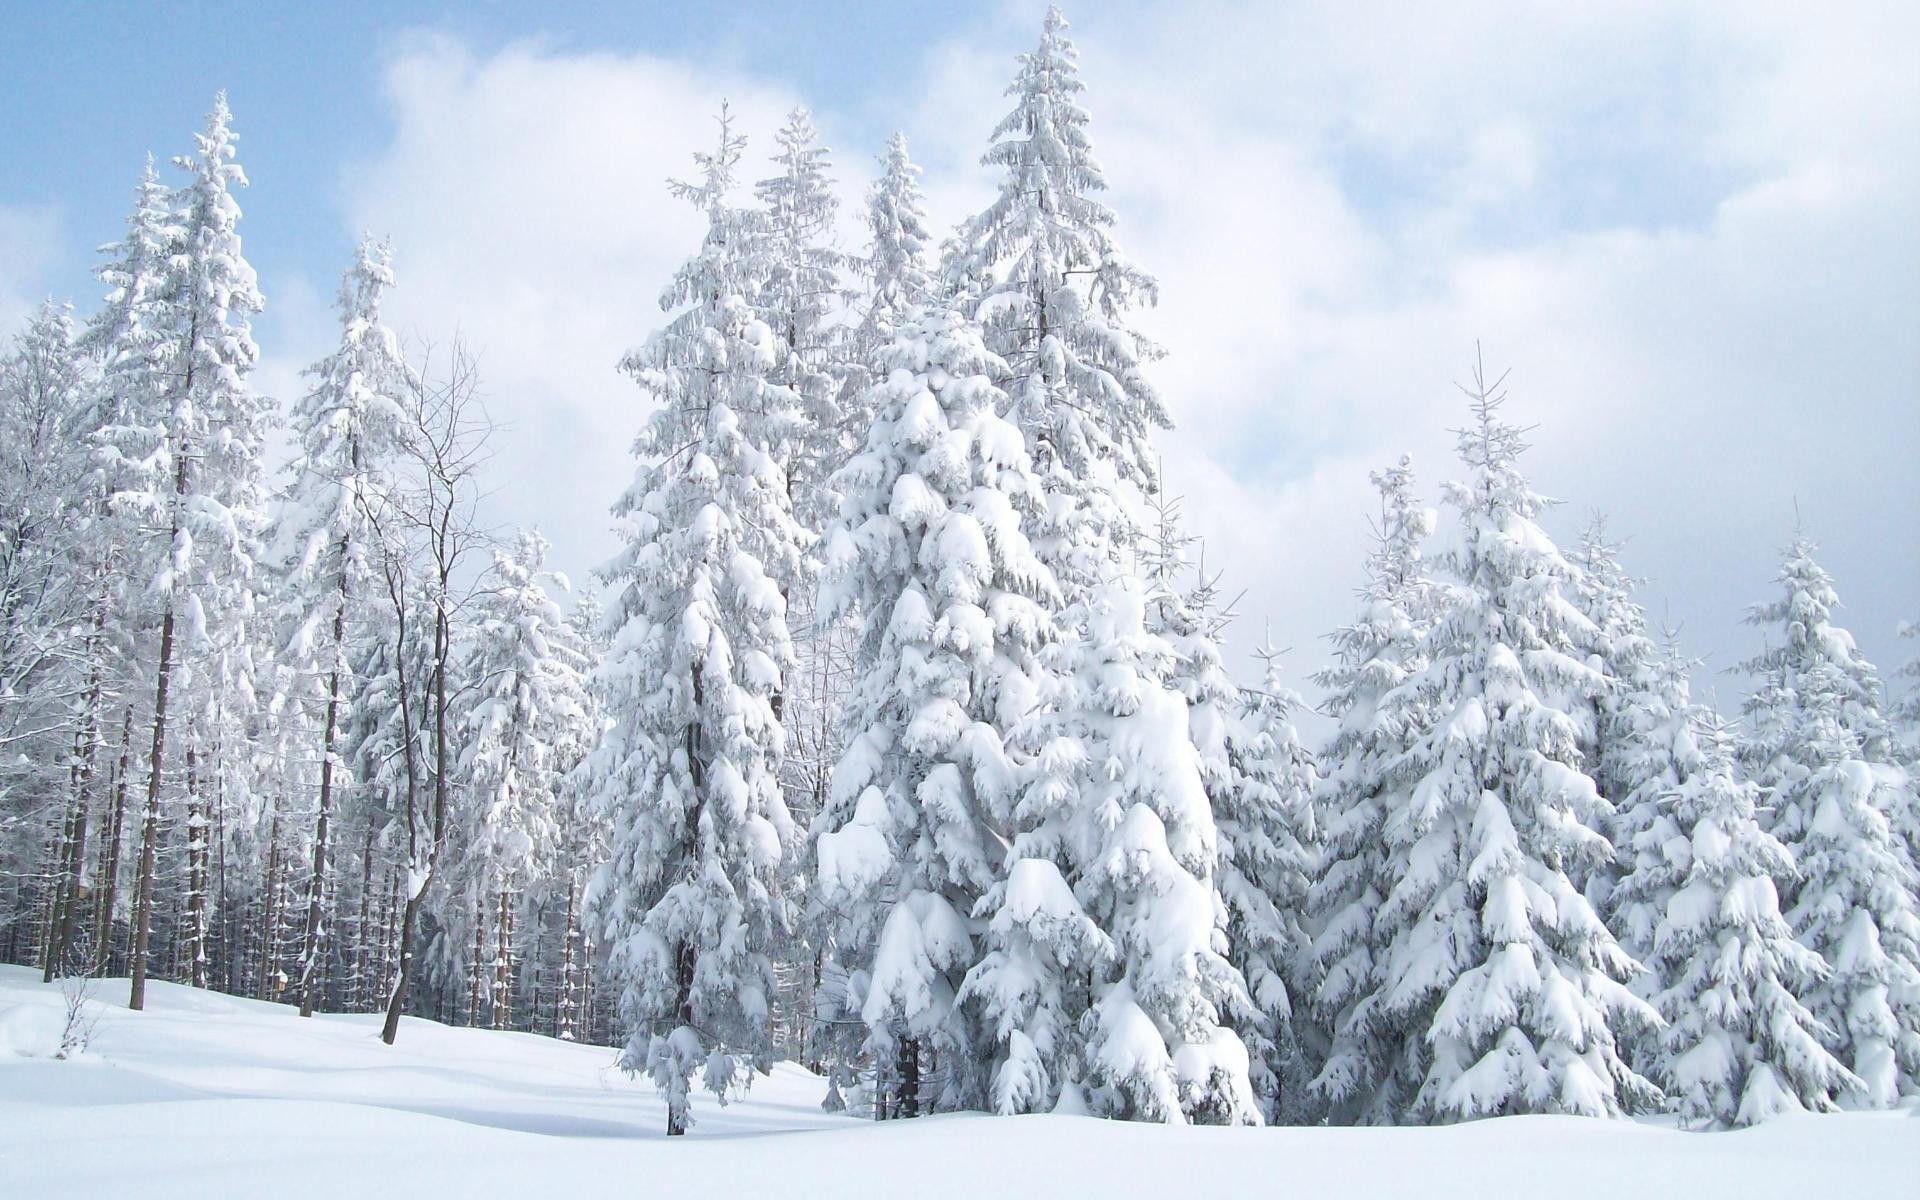 Snow Covered Fir Trees